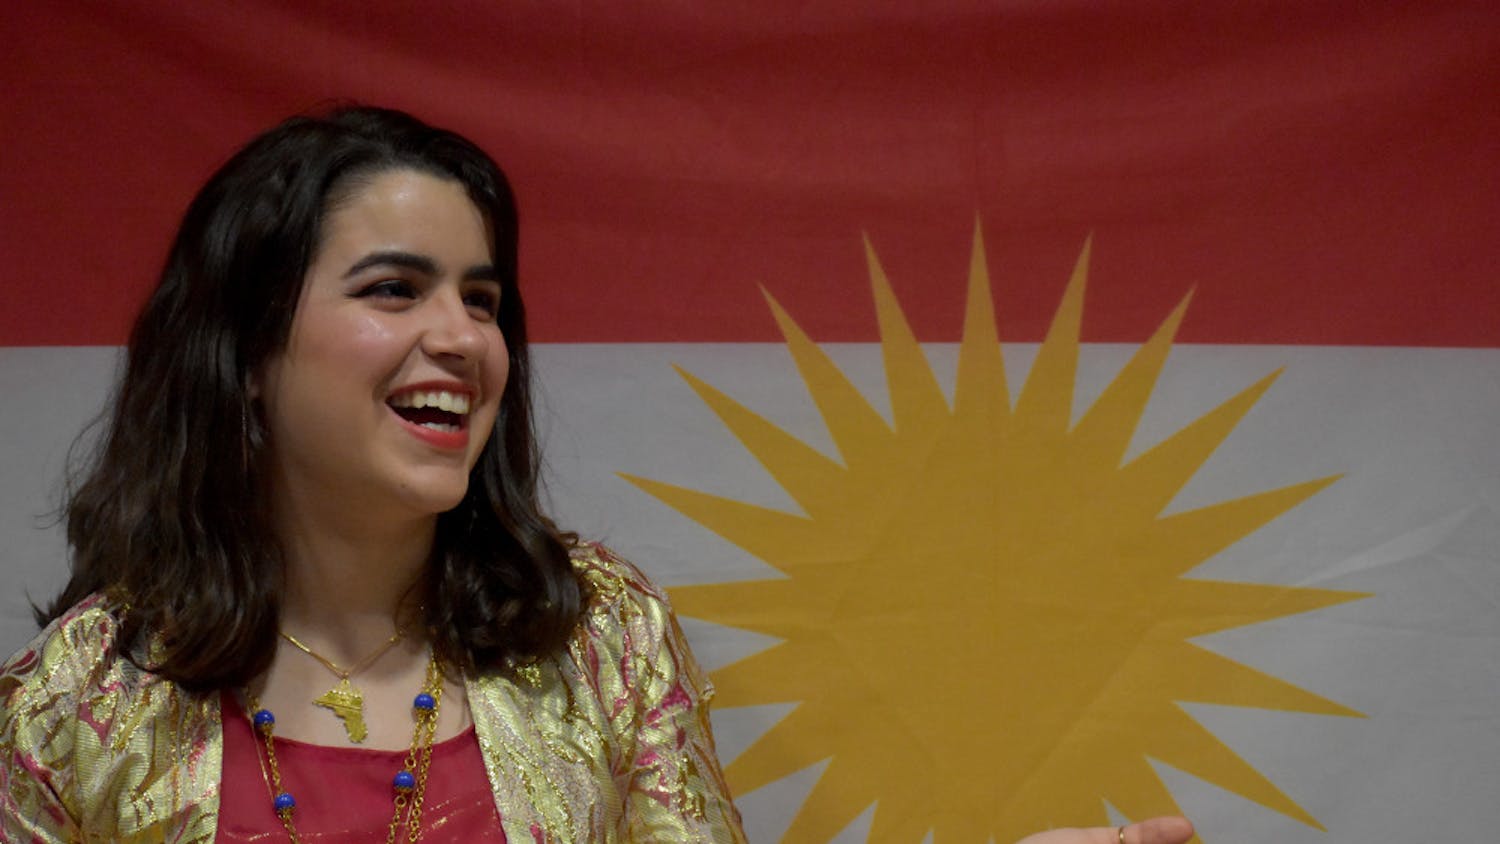 Sara Zandy, 20, representing her culture wearing a jily kurdy in front of the Kurdish flag.